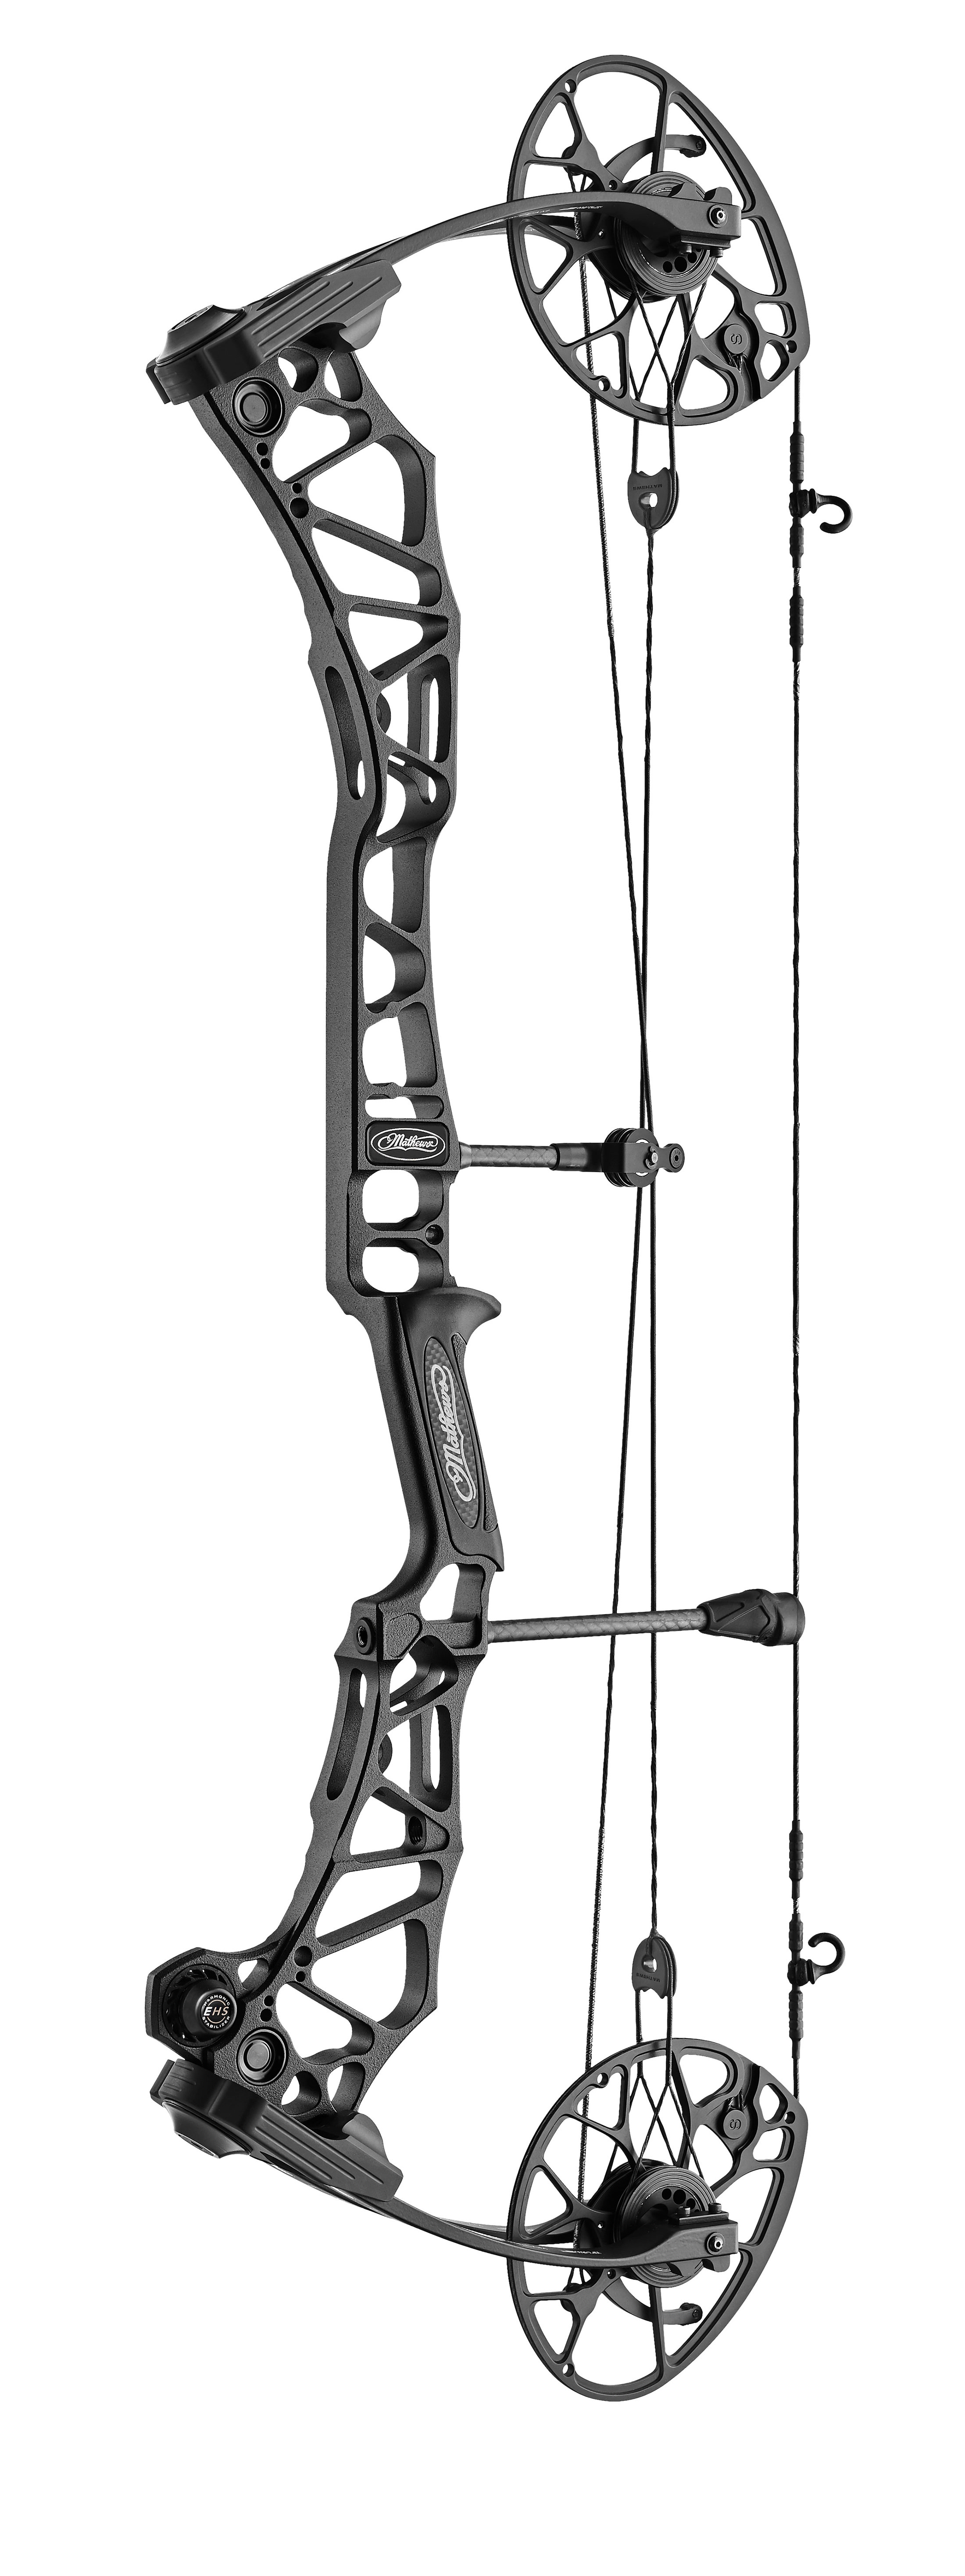 2019 Mathews Archery Releases New Bows FULL Media + Videos HERE